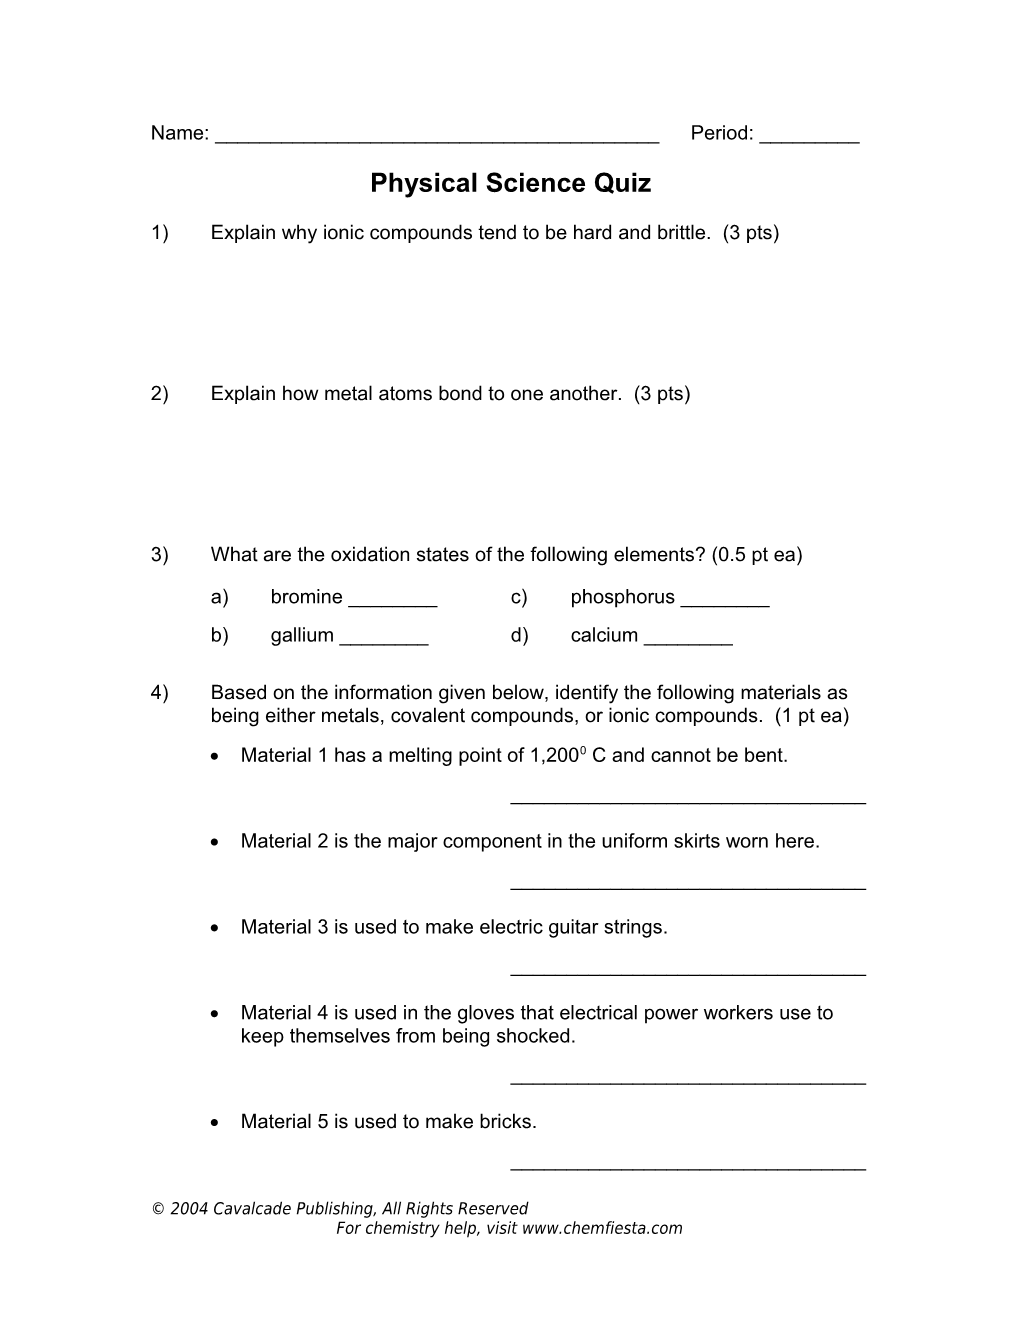 Physical Science Quiz